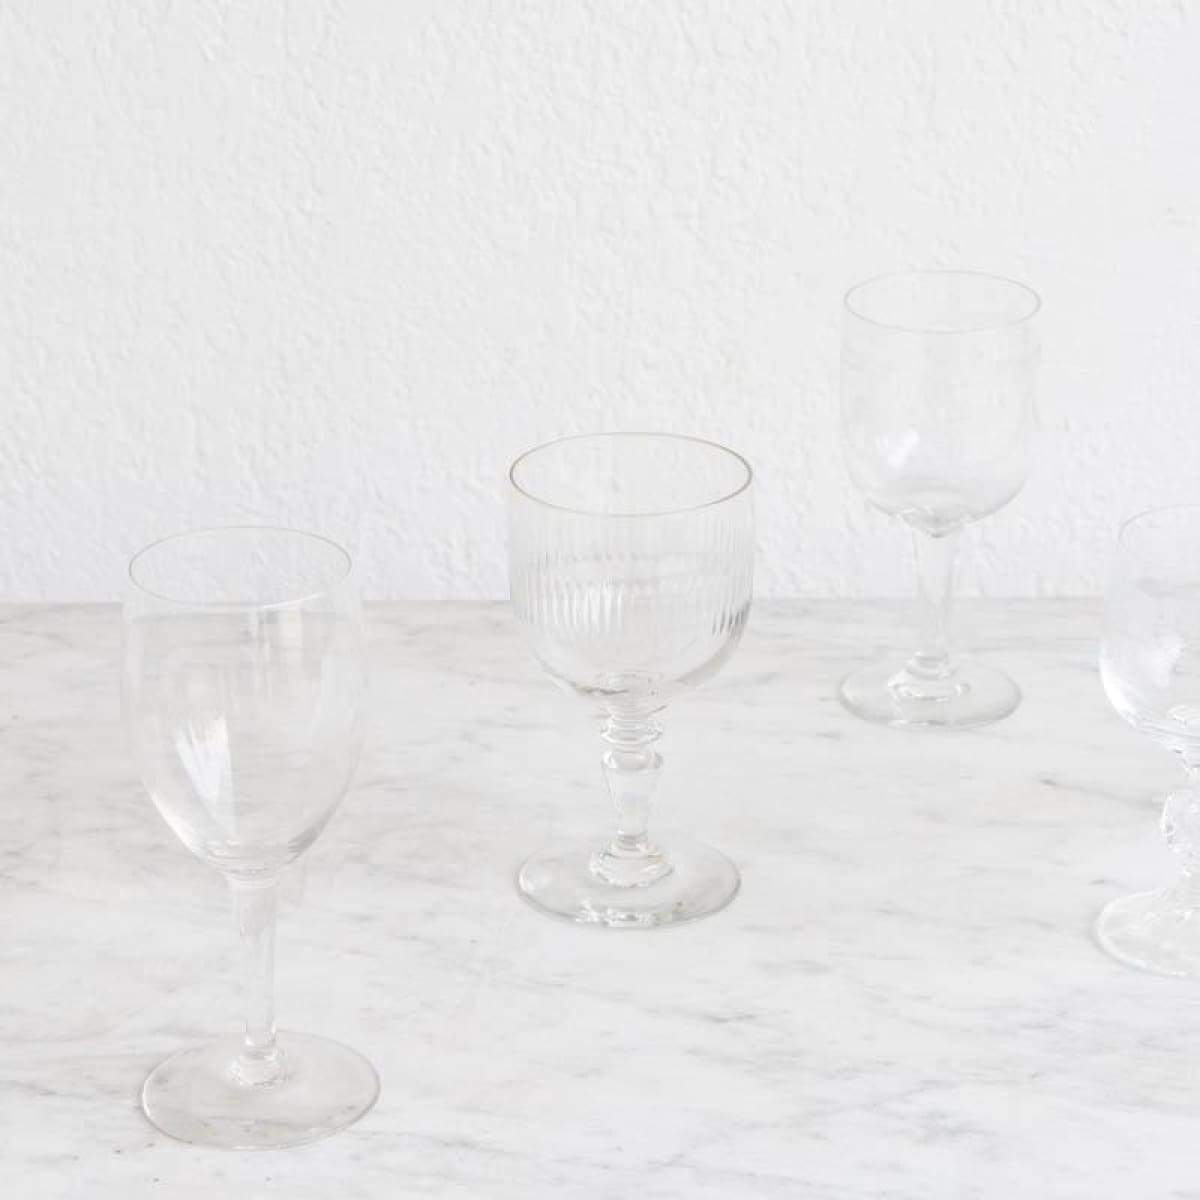 https://elsiegreen.com/cdn/shop/products/glamorous-vintage-wine-glass-eclectic-pair-the-french-kitchen-aperitif-appertif-glasses-champagne-coupe-coupes-stemware-white-drinkware-171.jpg?v=1613826081